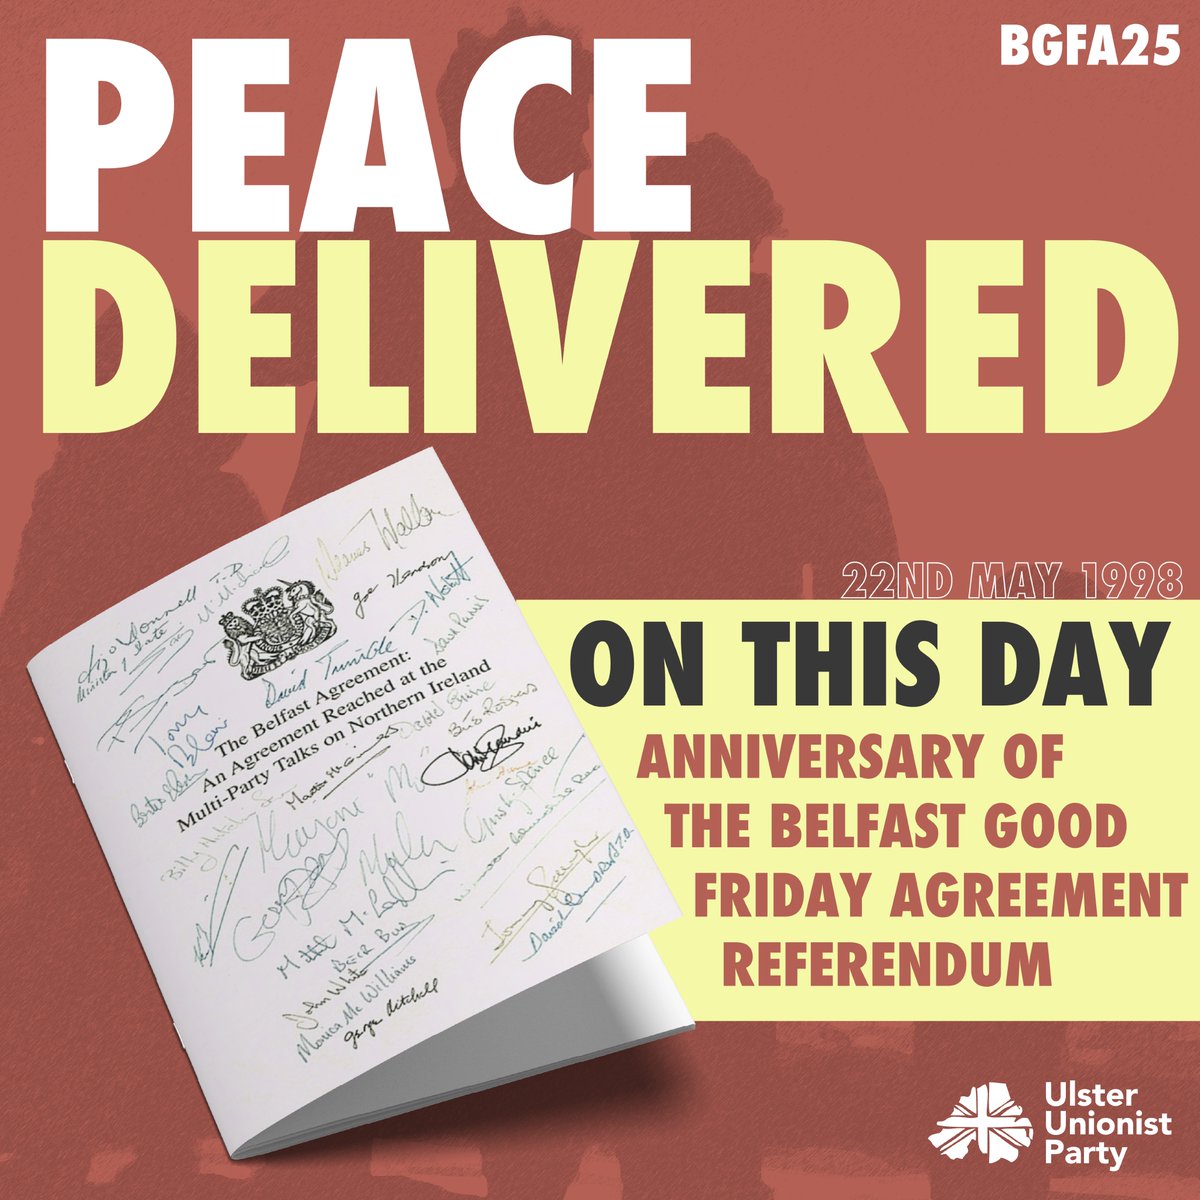 🗓On this day, 22nd May 1998

The people of Northern Ireland voted in favour of the Belfast Good Friday Agreement, securing a brighter future for us all. 

#BGFA25